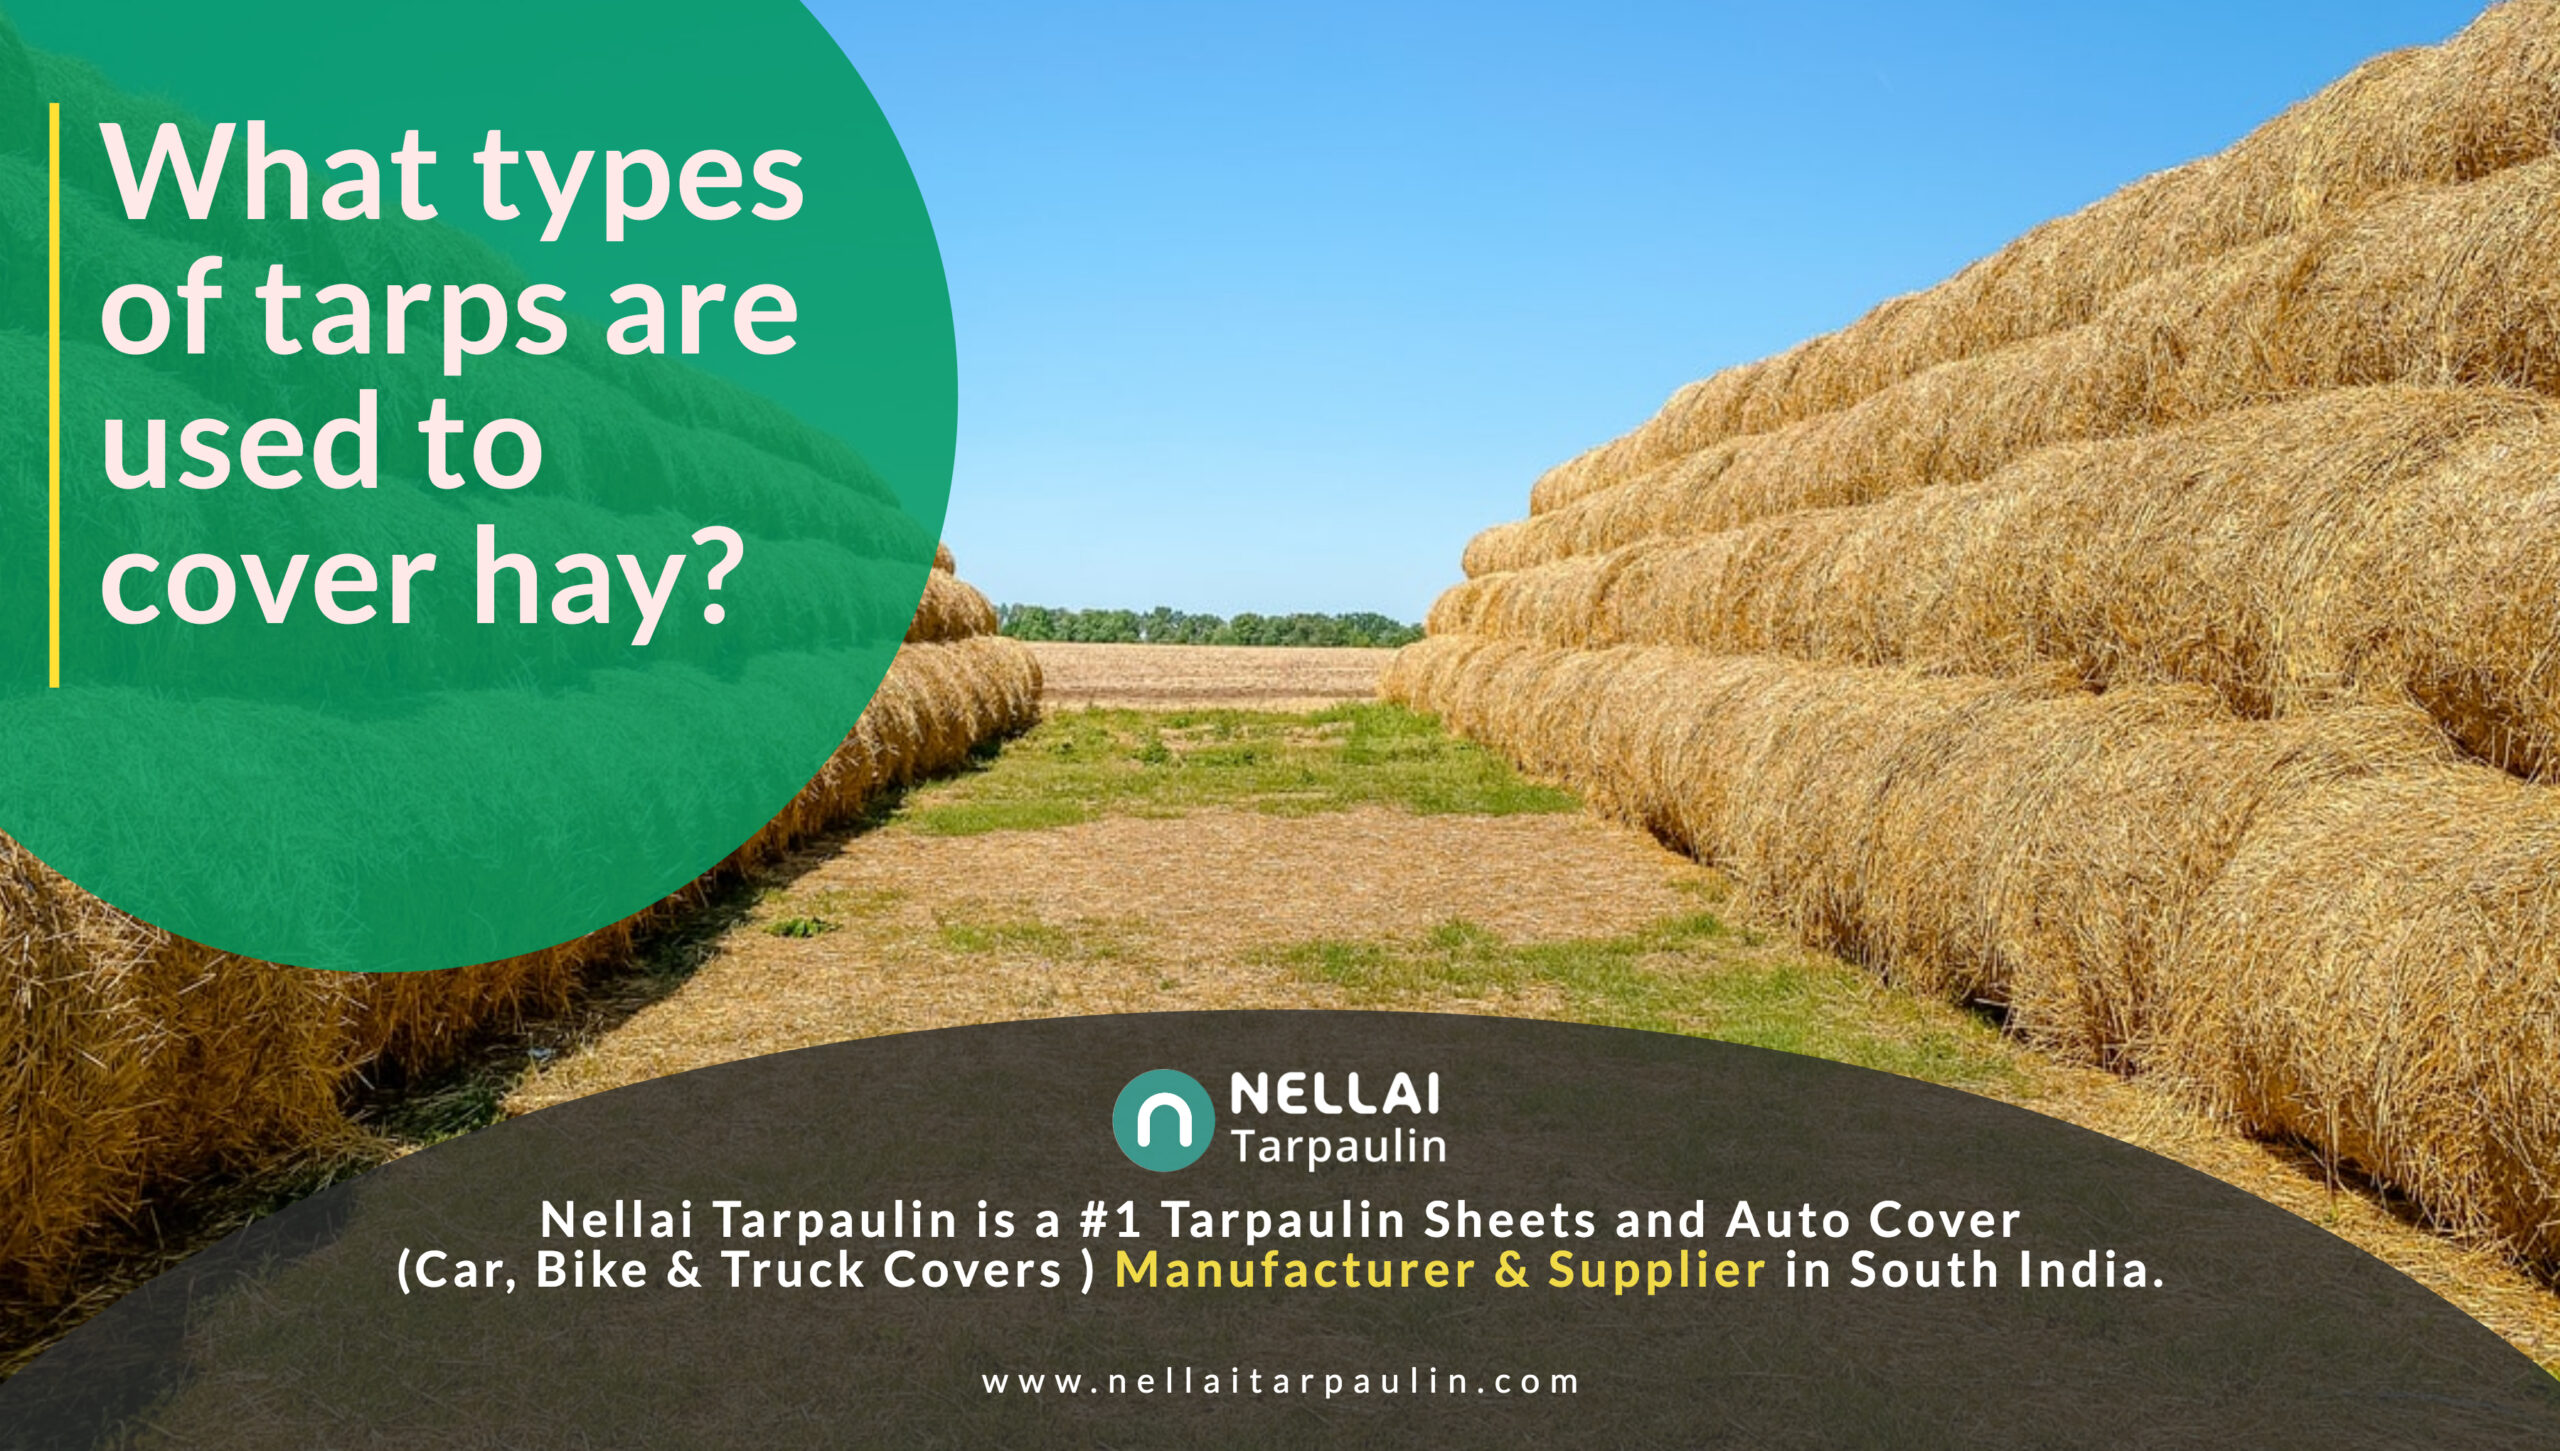 What types of tarps are used to cover hay?